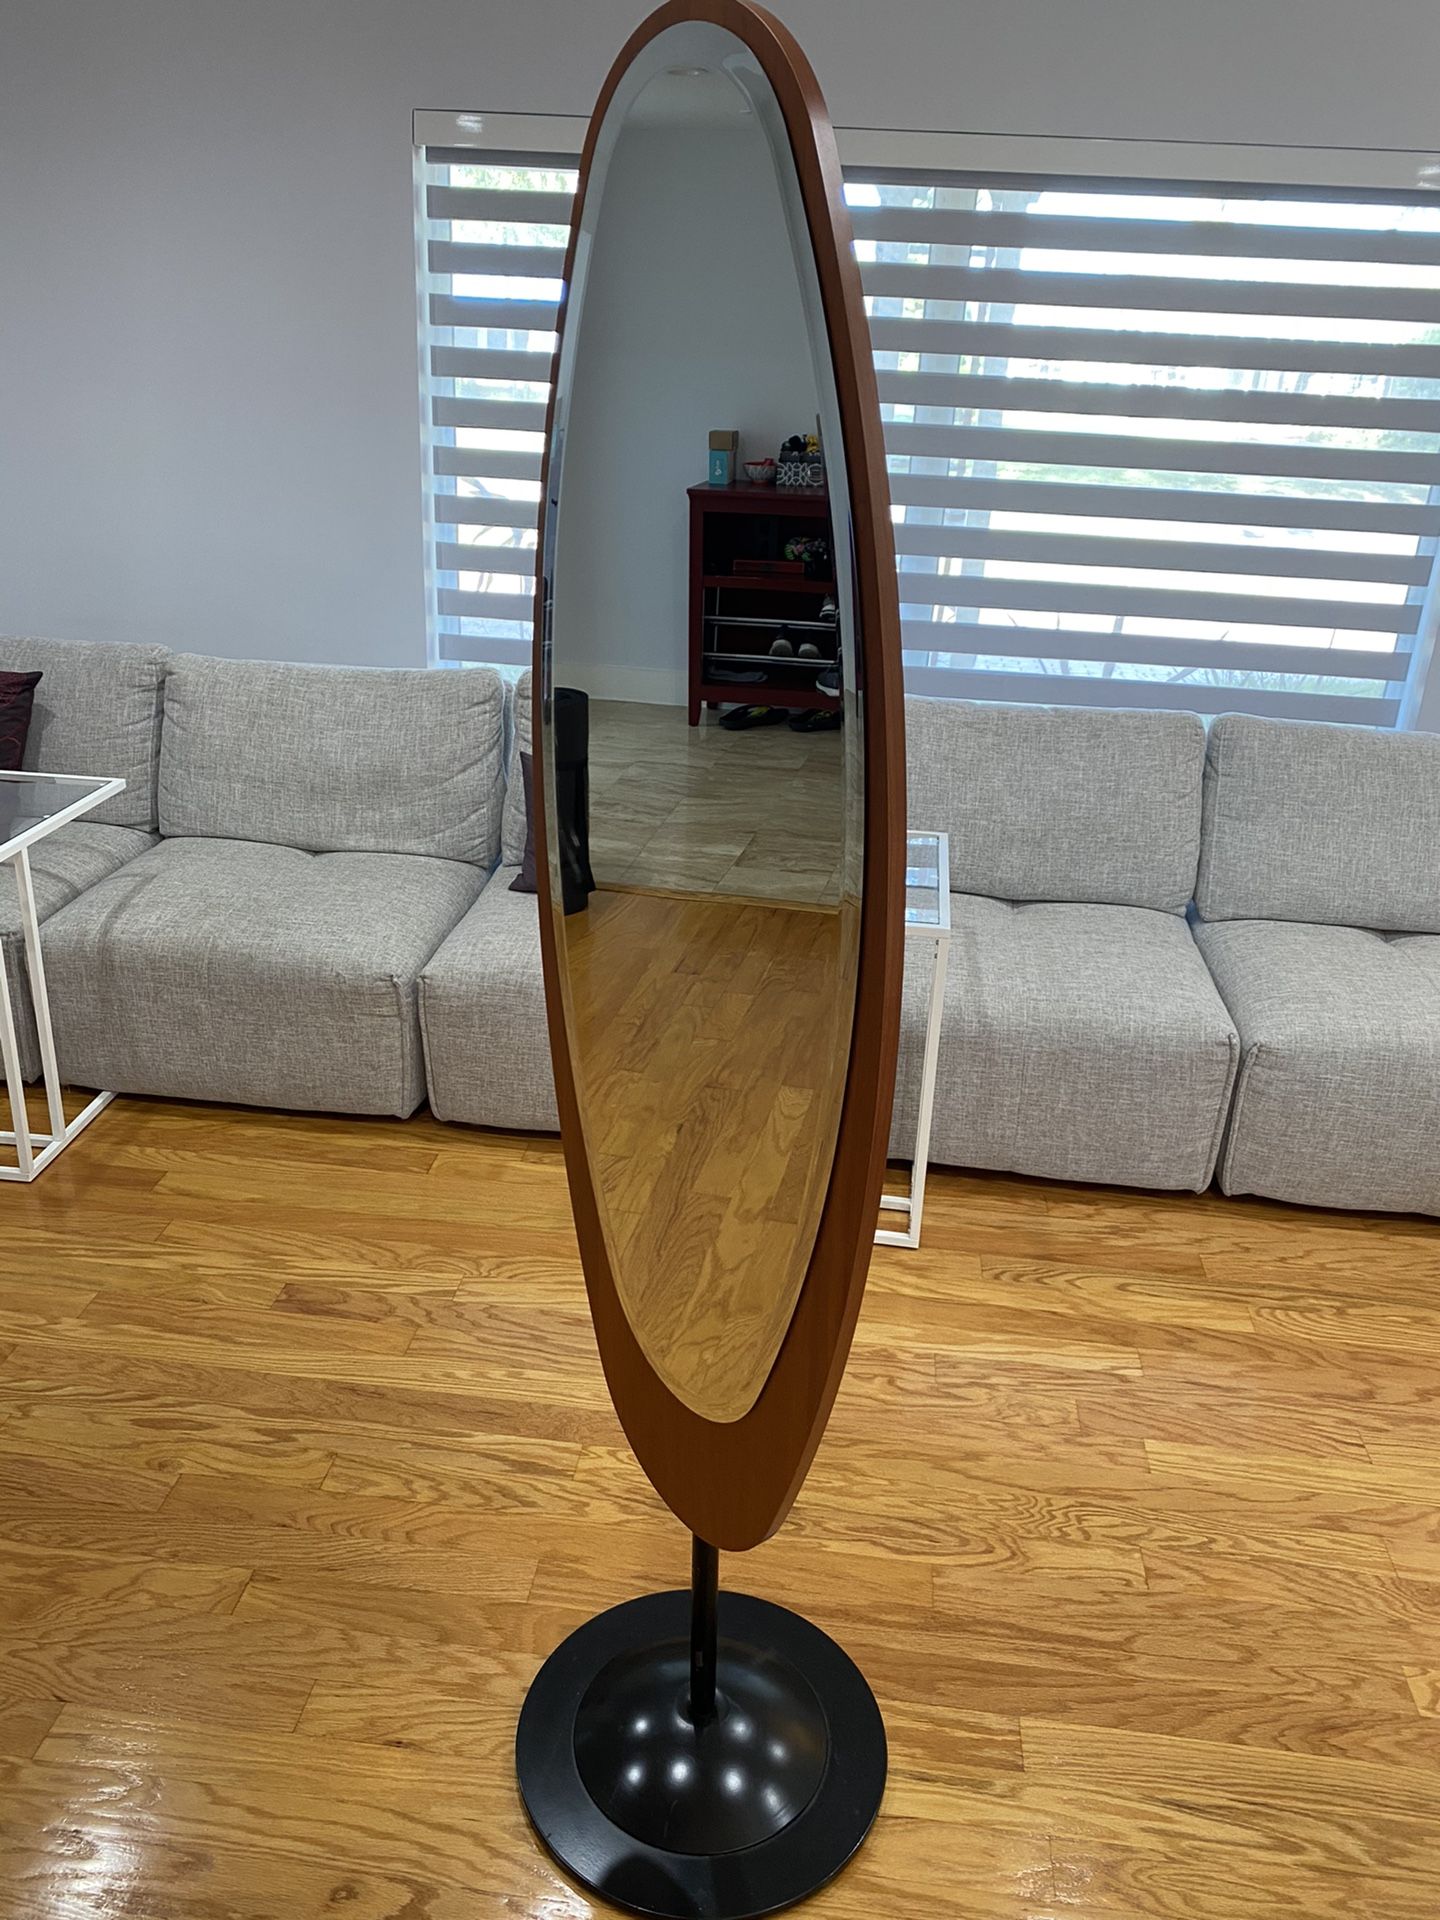 Mirror self standing that swivels 180 degrees